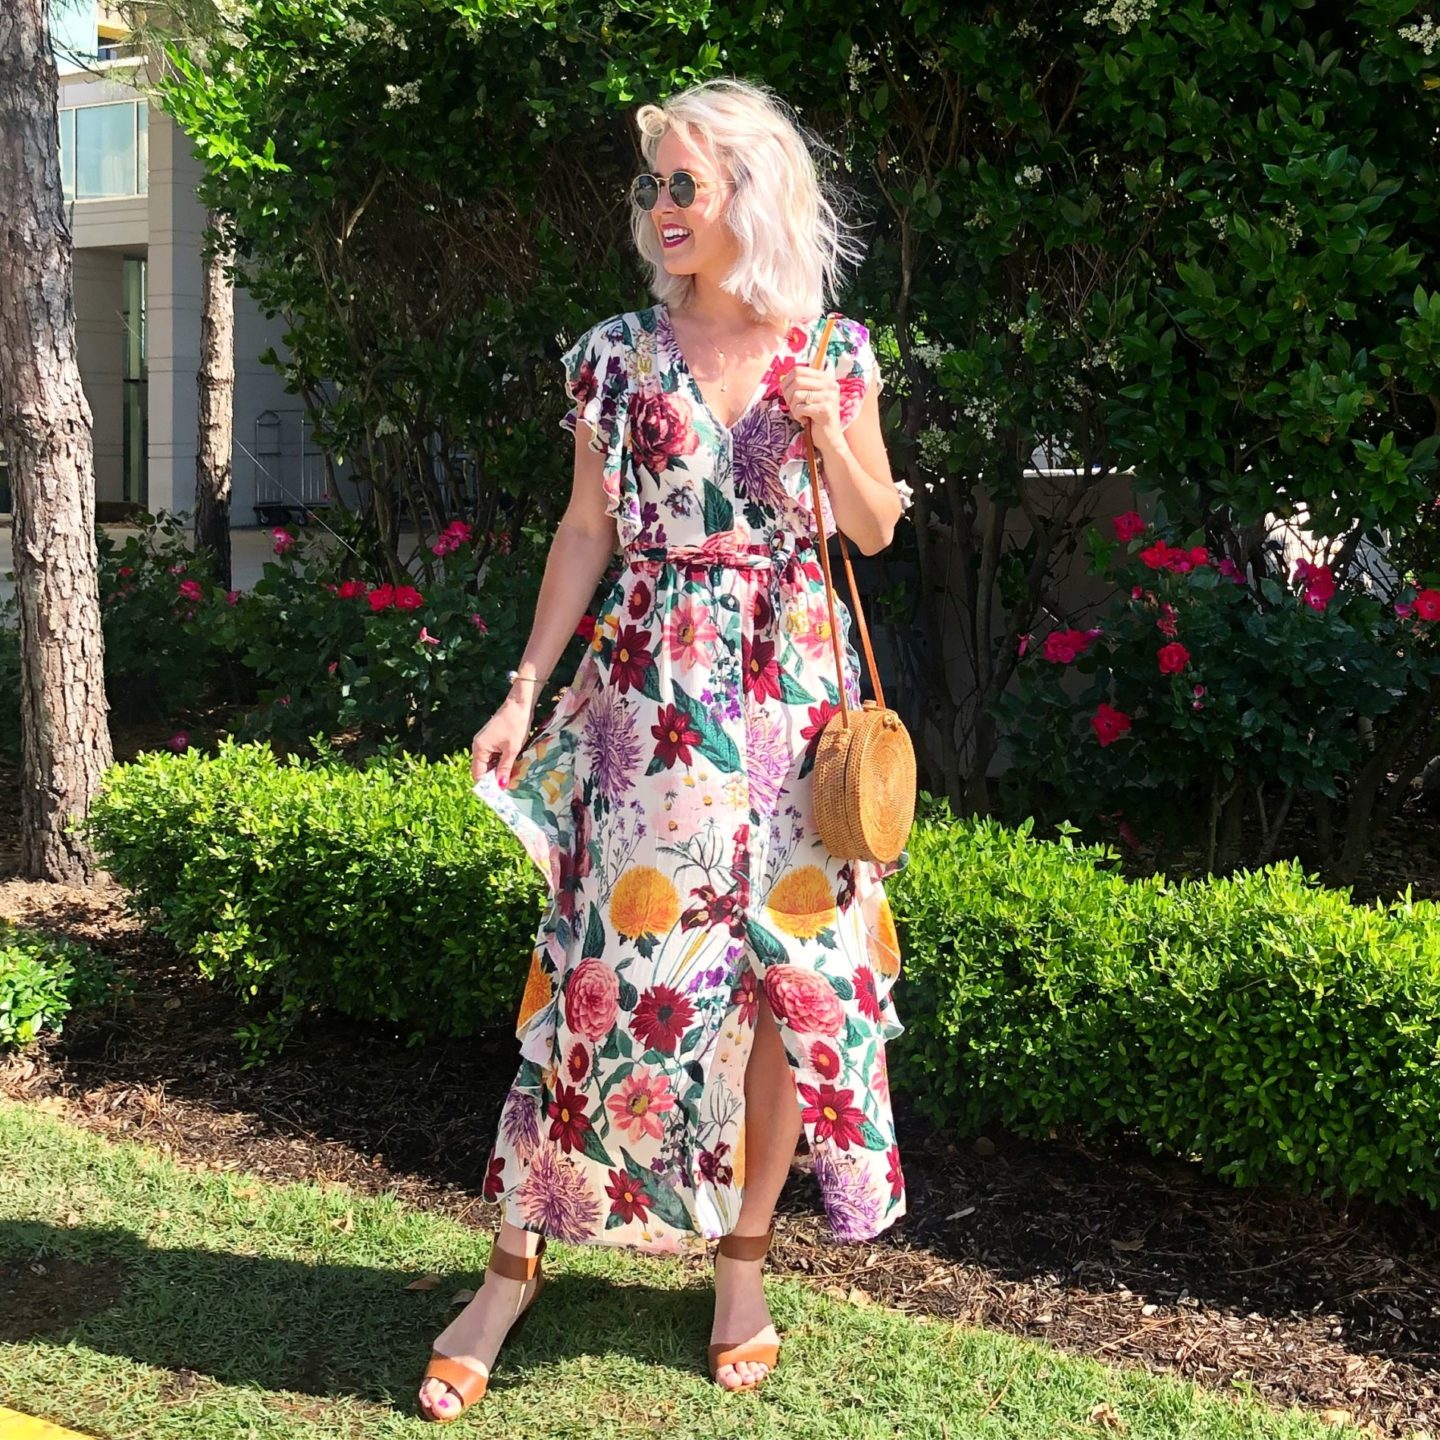 21 Different Outfits To Wear To A Summer Wedding – THE DAILY TAY